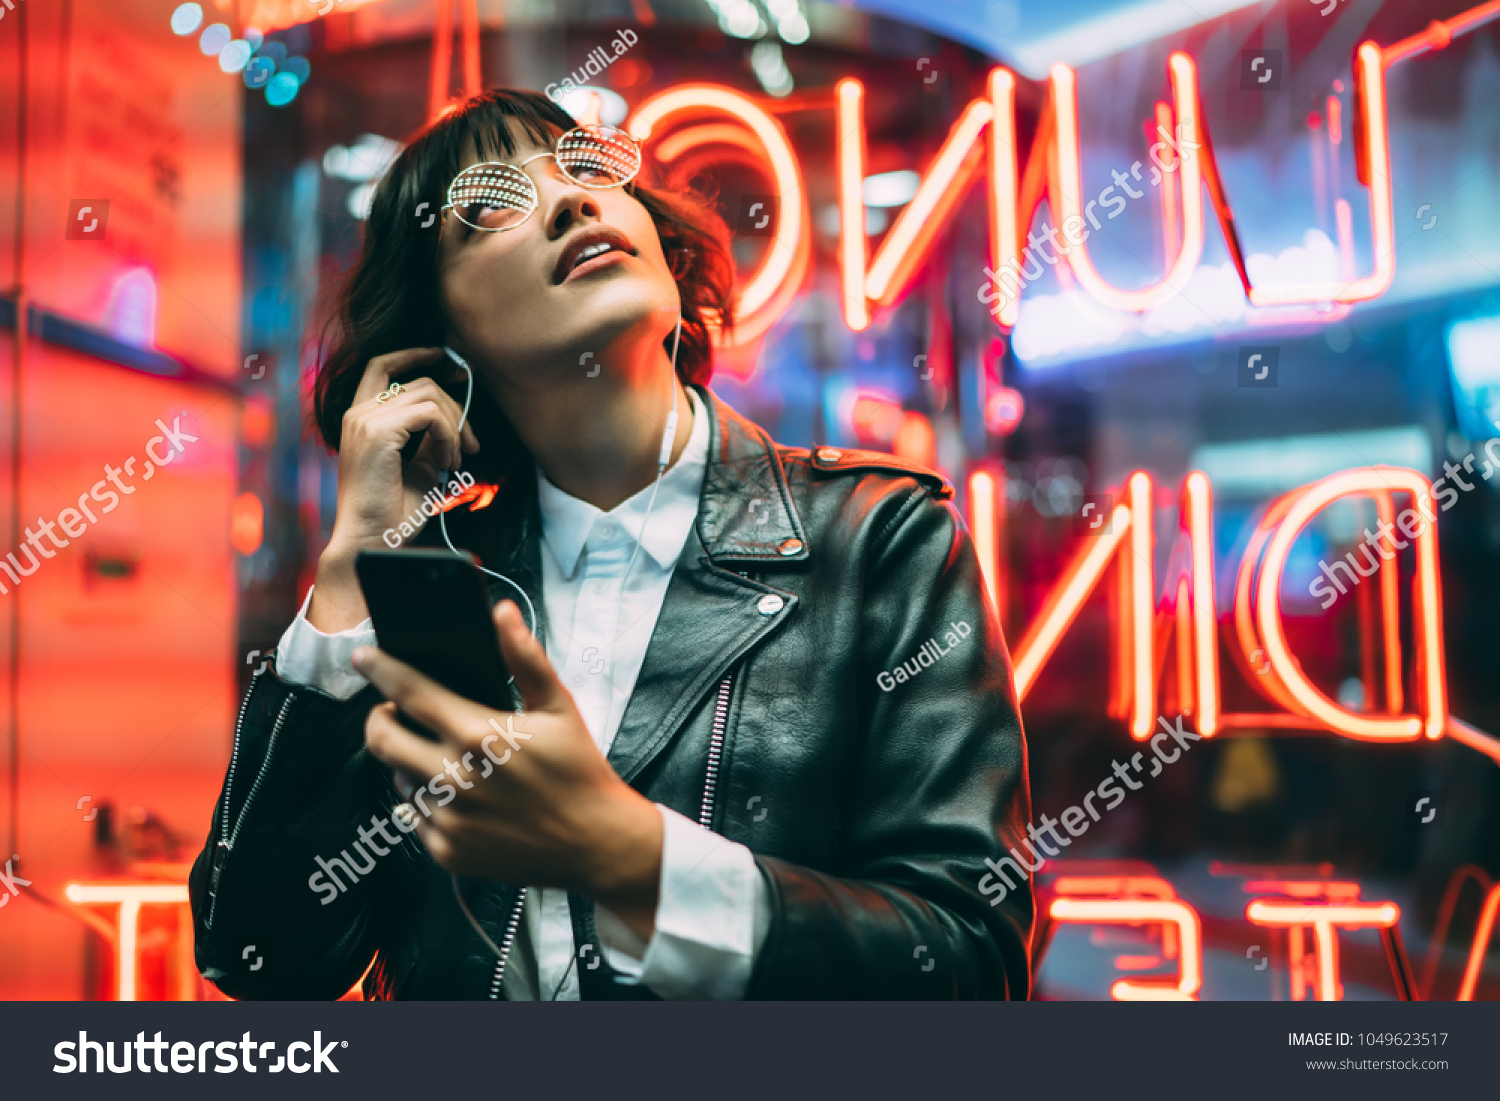 Excited fashion female lover of music dressed in stylish leather jacket listening songs online in earphones connected to smartphone while enjoying night lights and neon illumination in New York City #1049623517